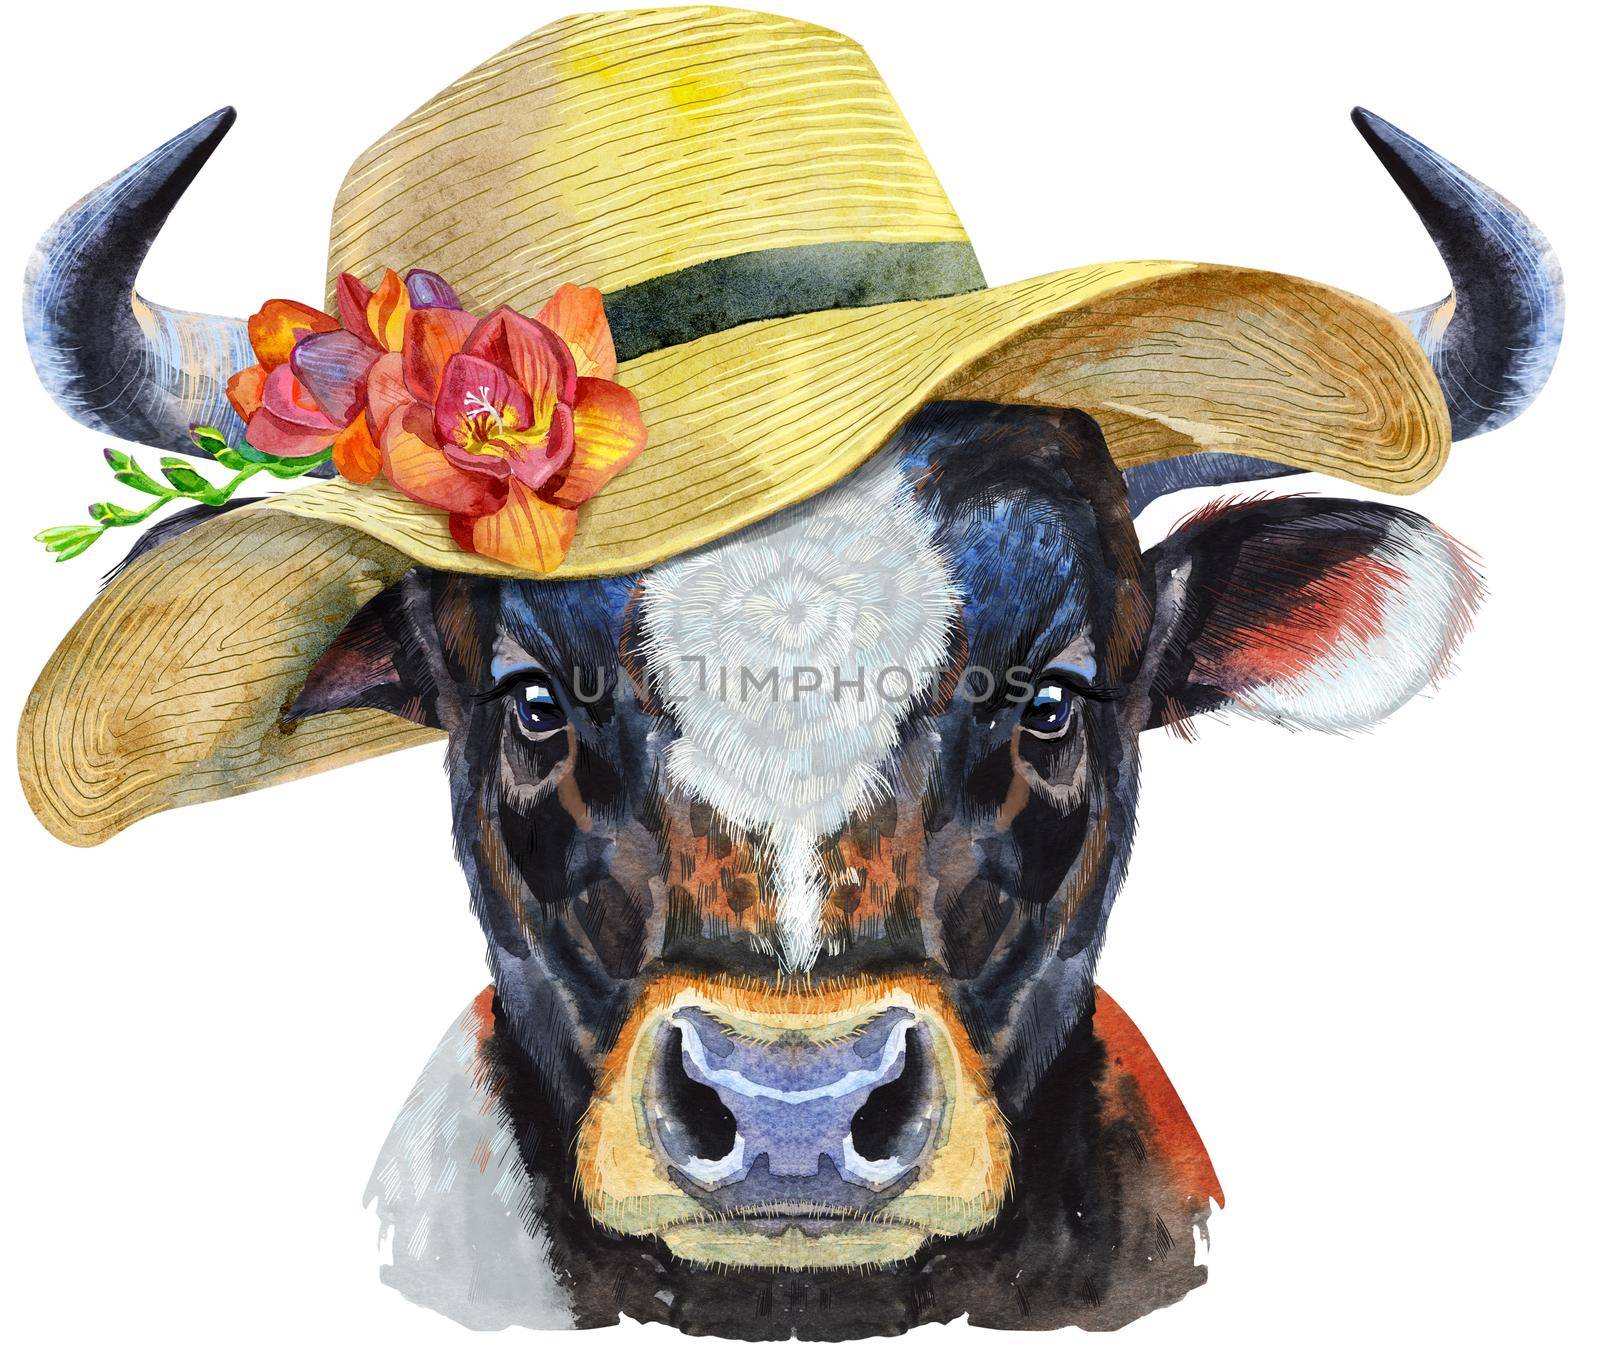 Bull watercolor graphics. Bull in summer hat. Animal illustration with splashes watercolor textured background.